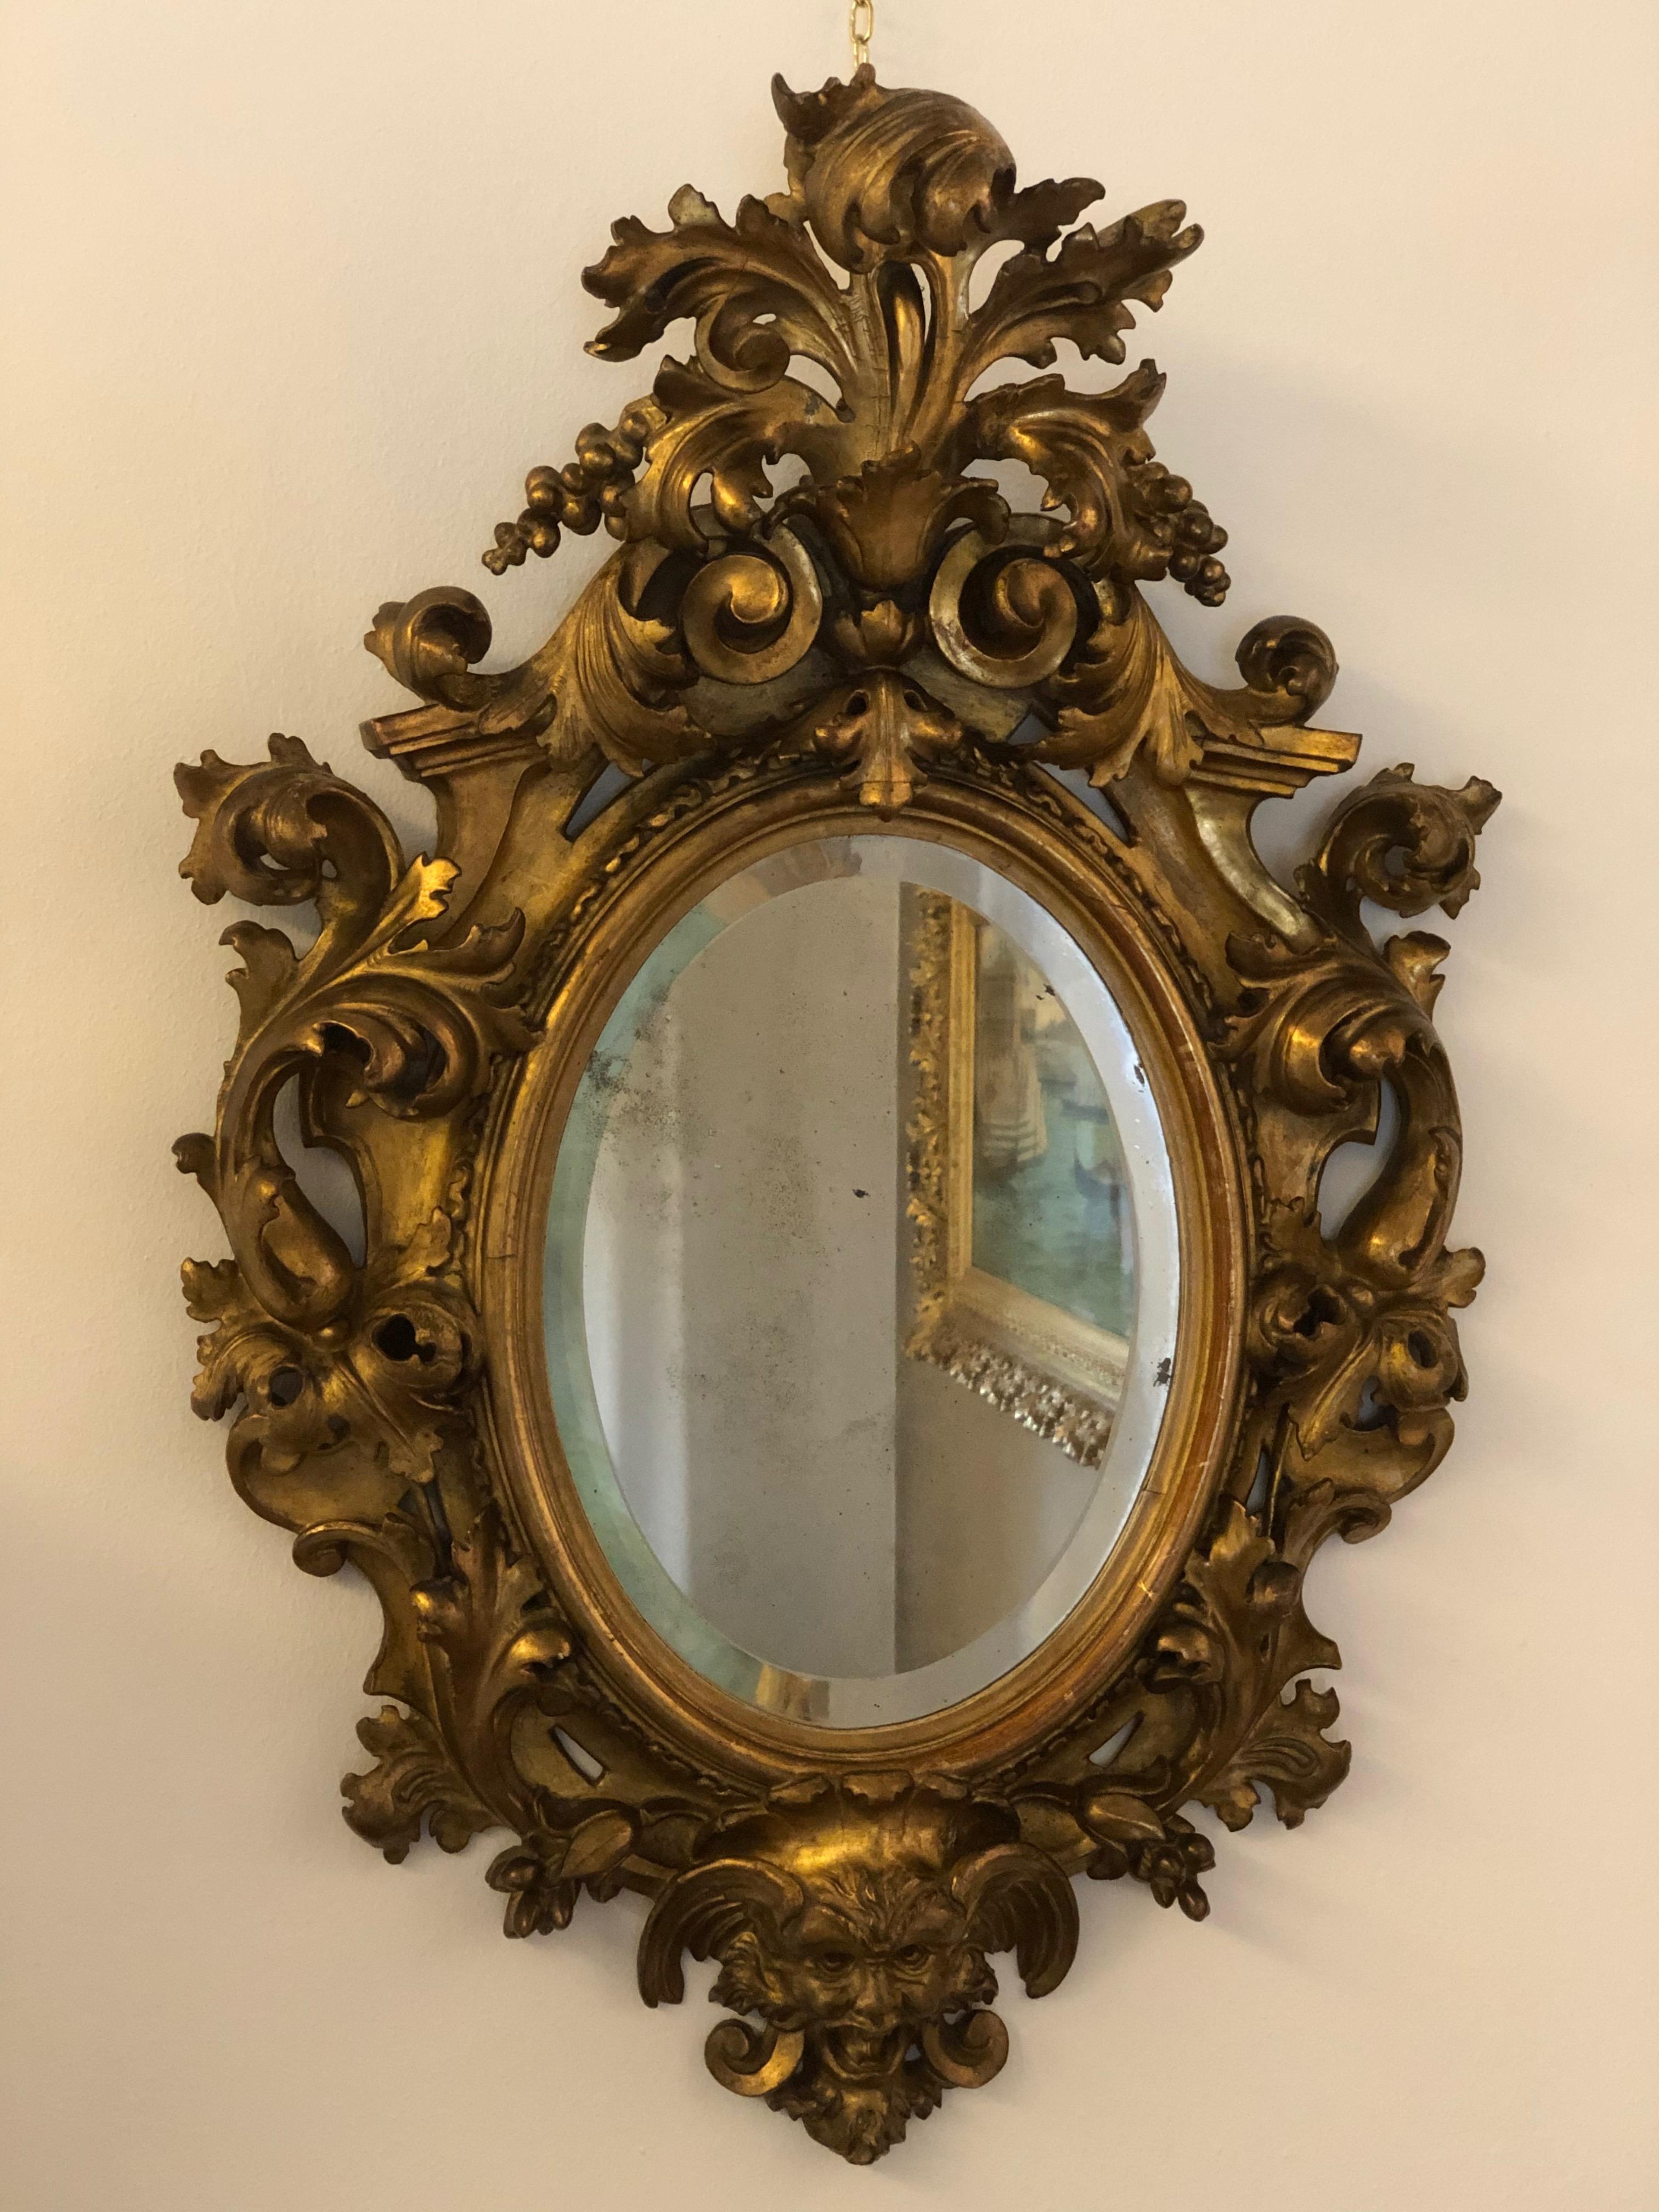 Wonderful Tuscan mirror of the early 1800s, with original glass.
This Tuscan foil mirror of great decorative effect the game dictated by the golden foliage favors the effect of three-dimensionality giving a beautiful appearance and is able to